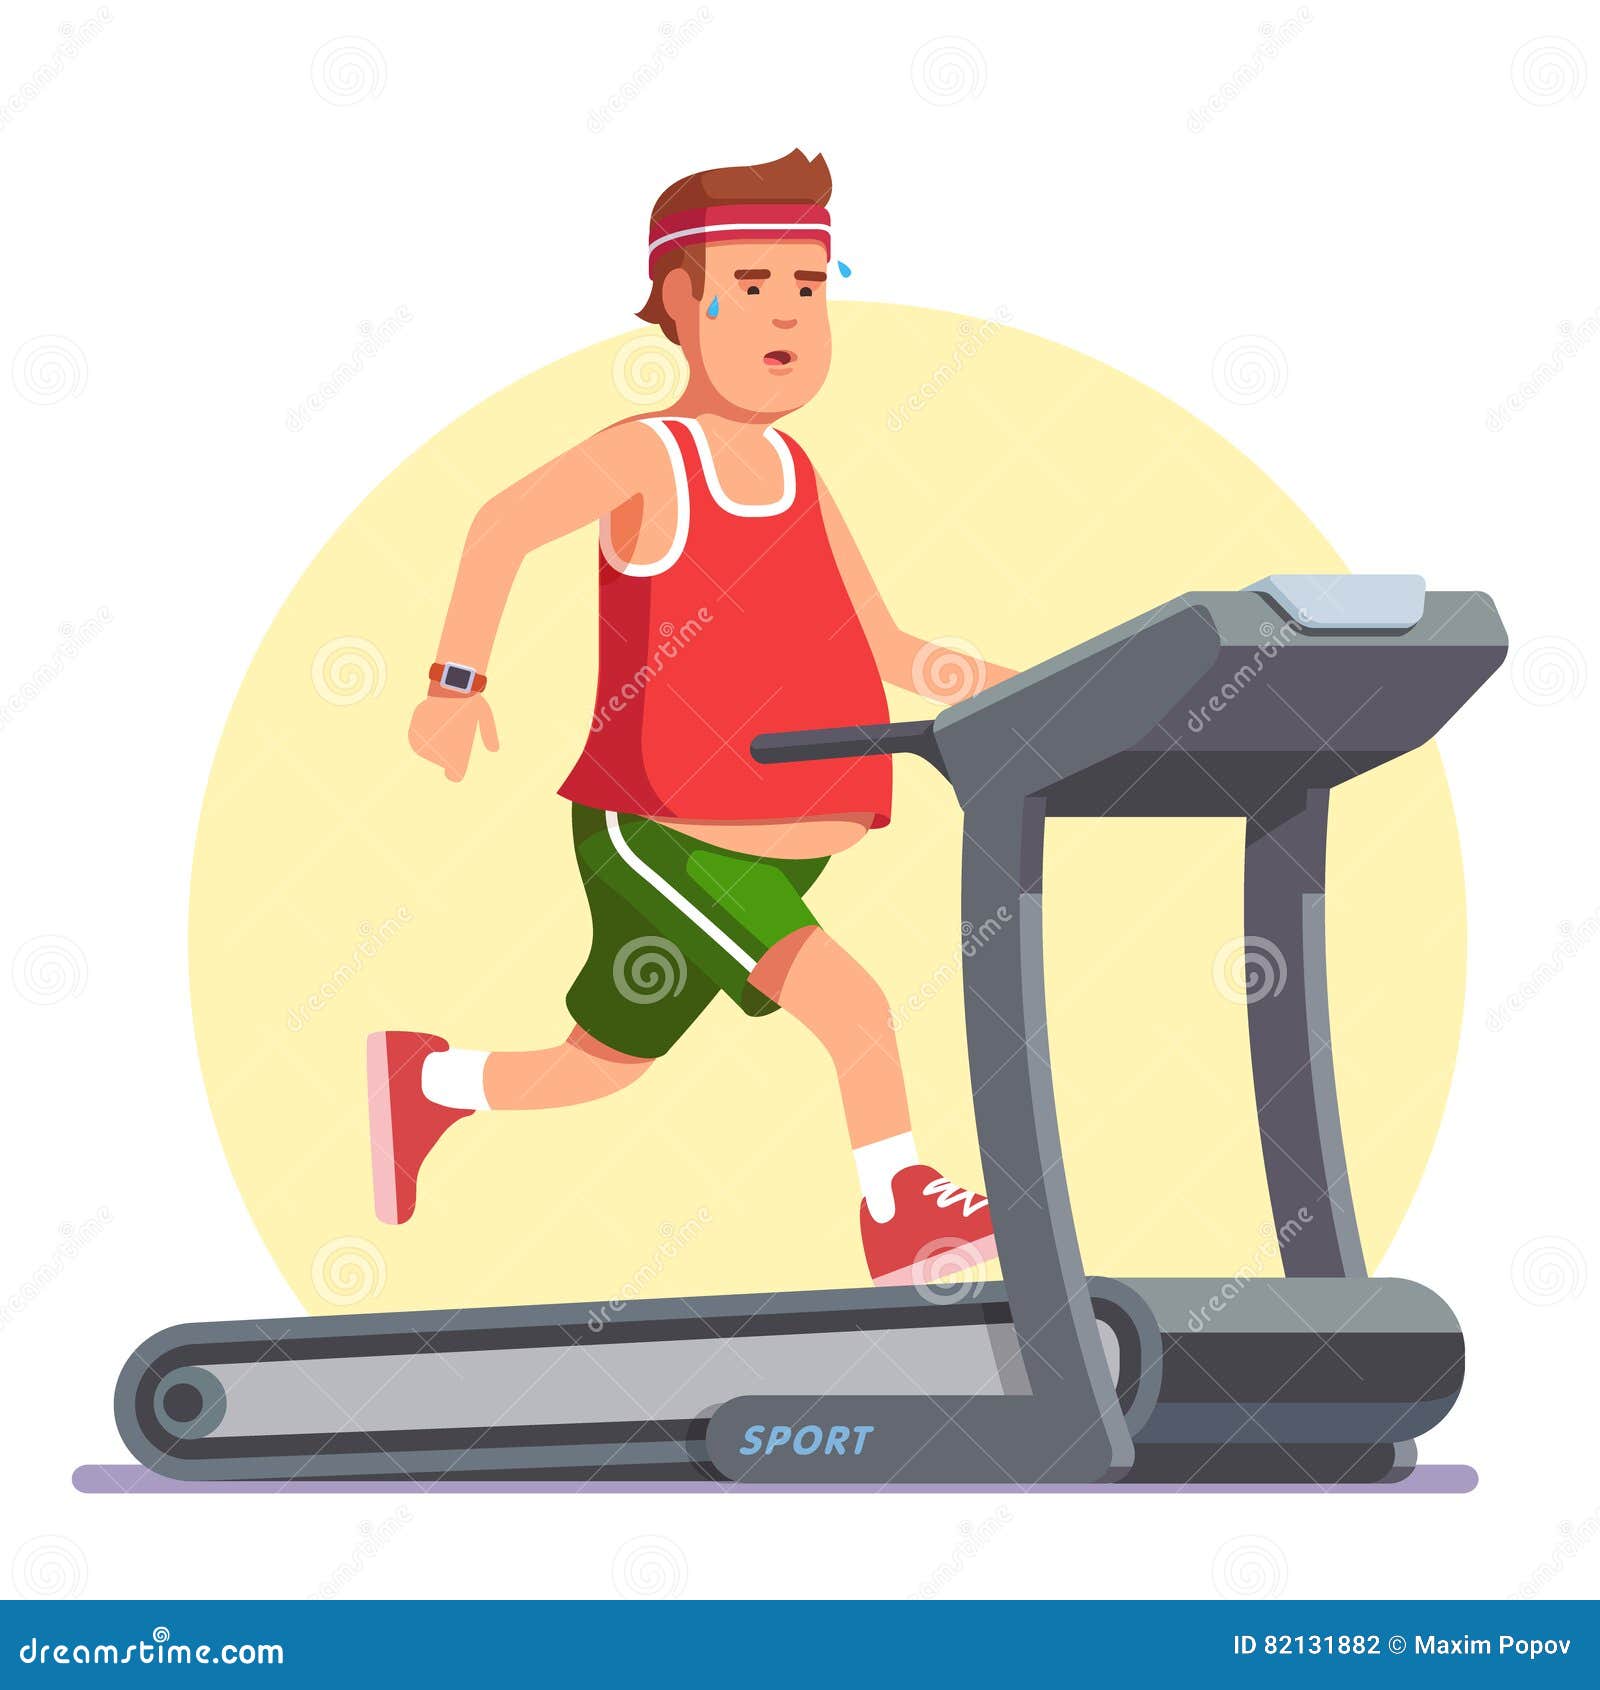 obese young man running on treadmill